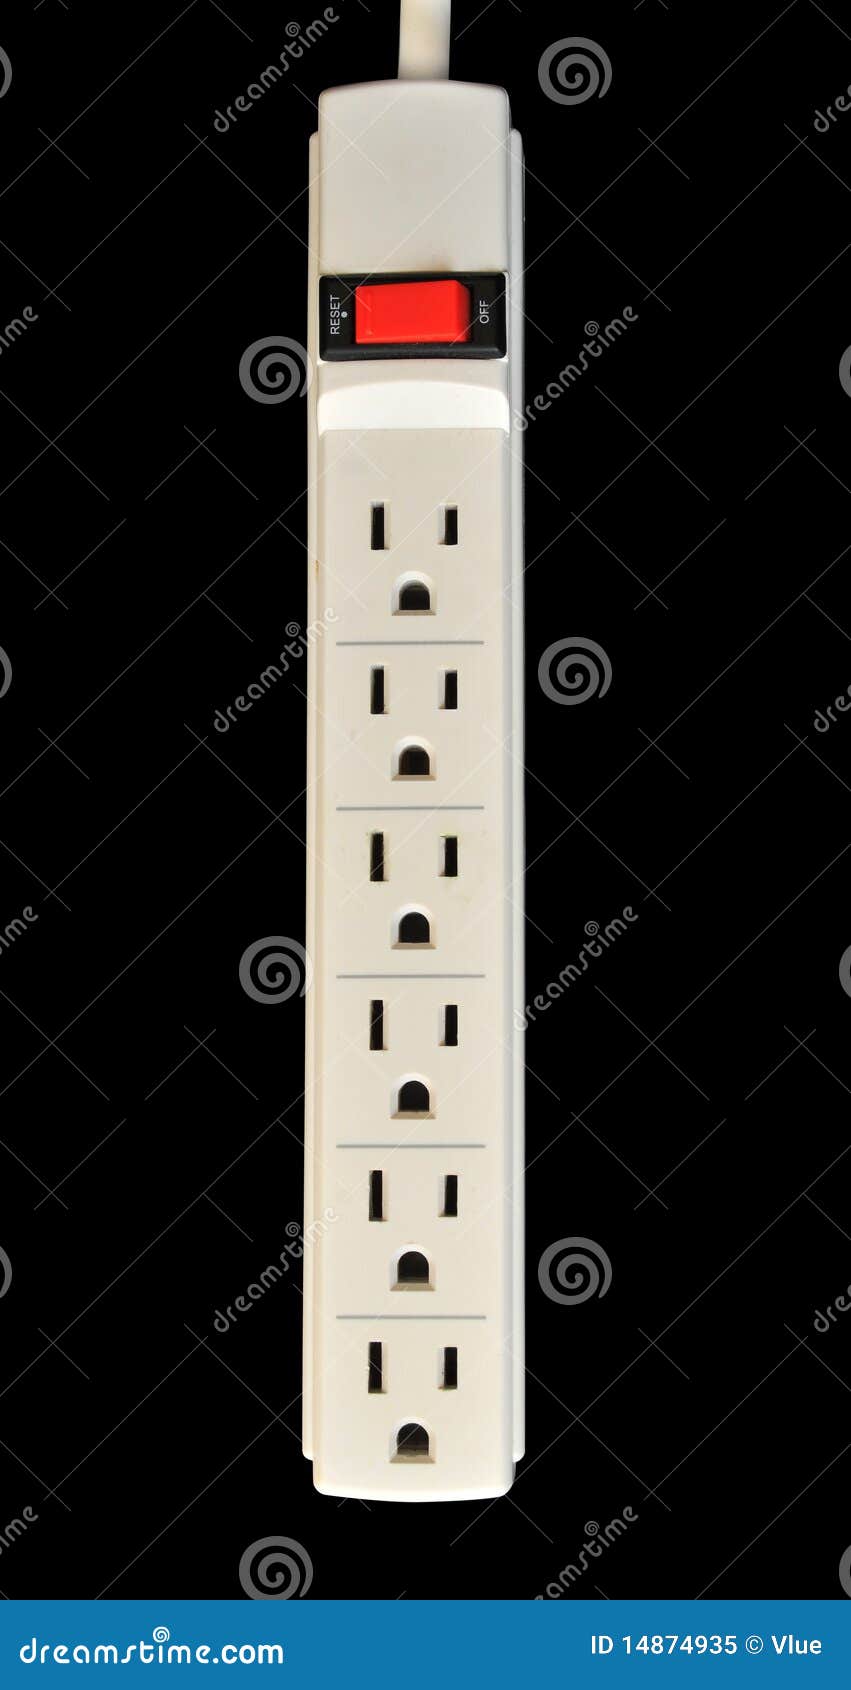 surge protector electric outlet